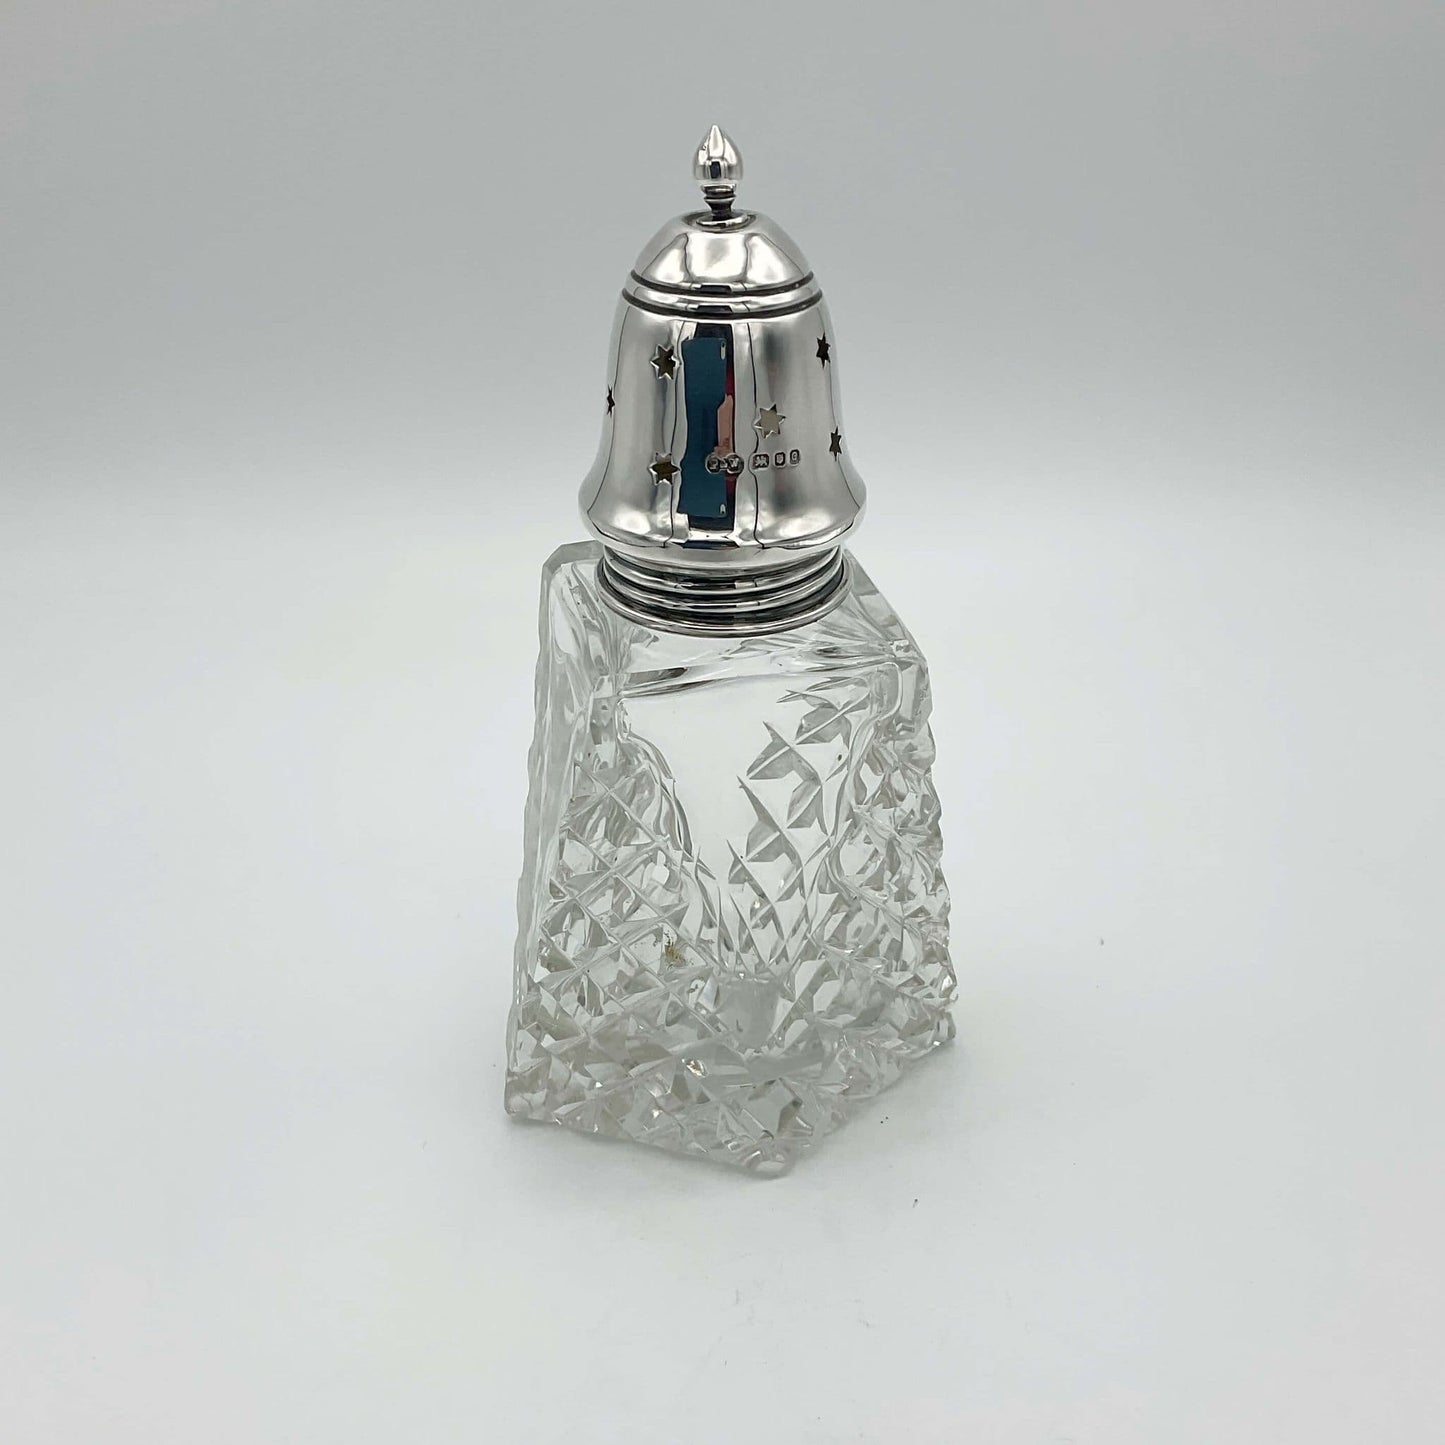 Silver topped sugar shaker with hallmarks and cut crystal glass base